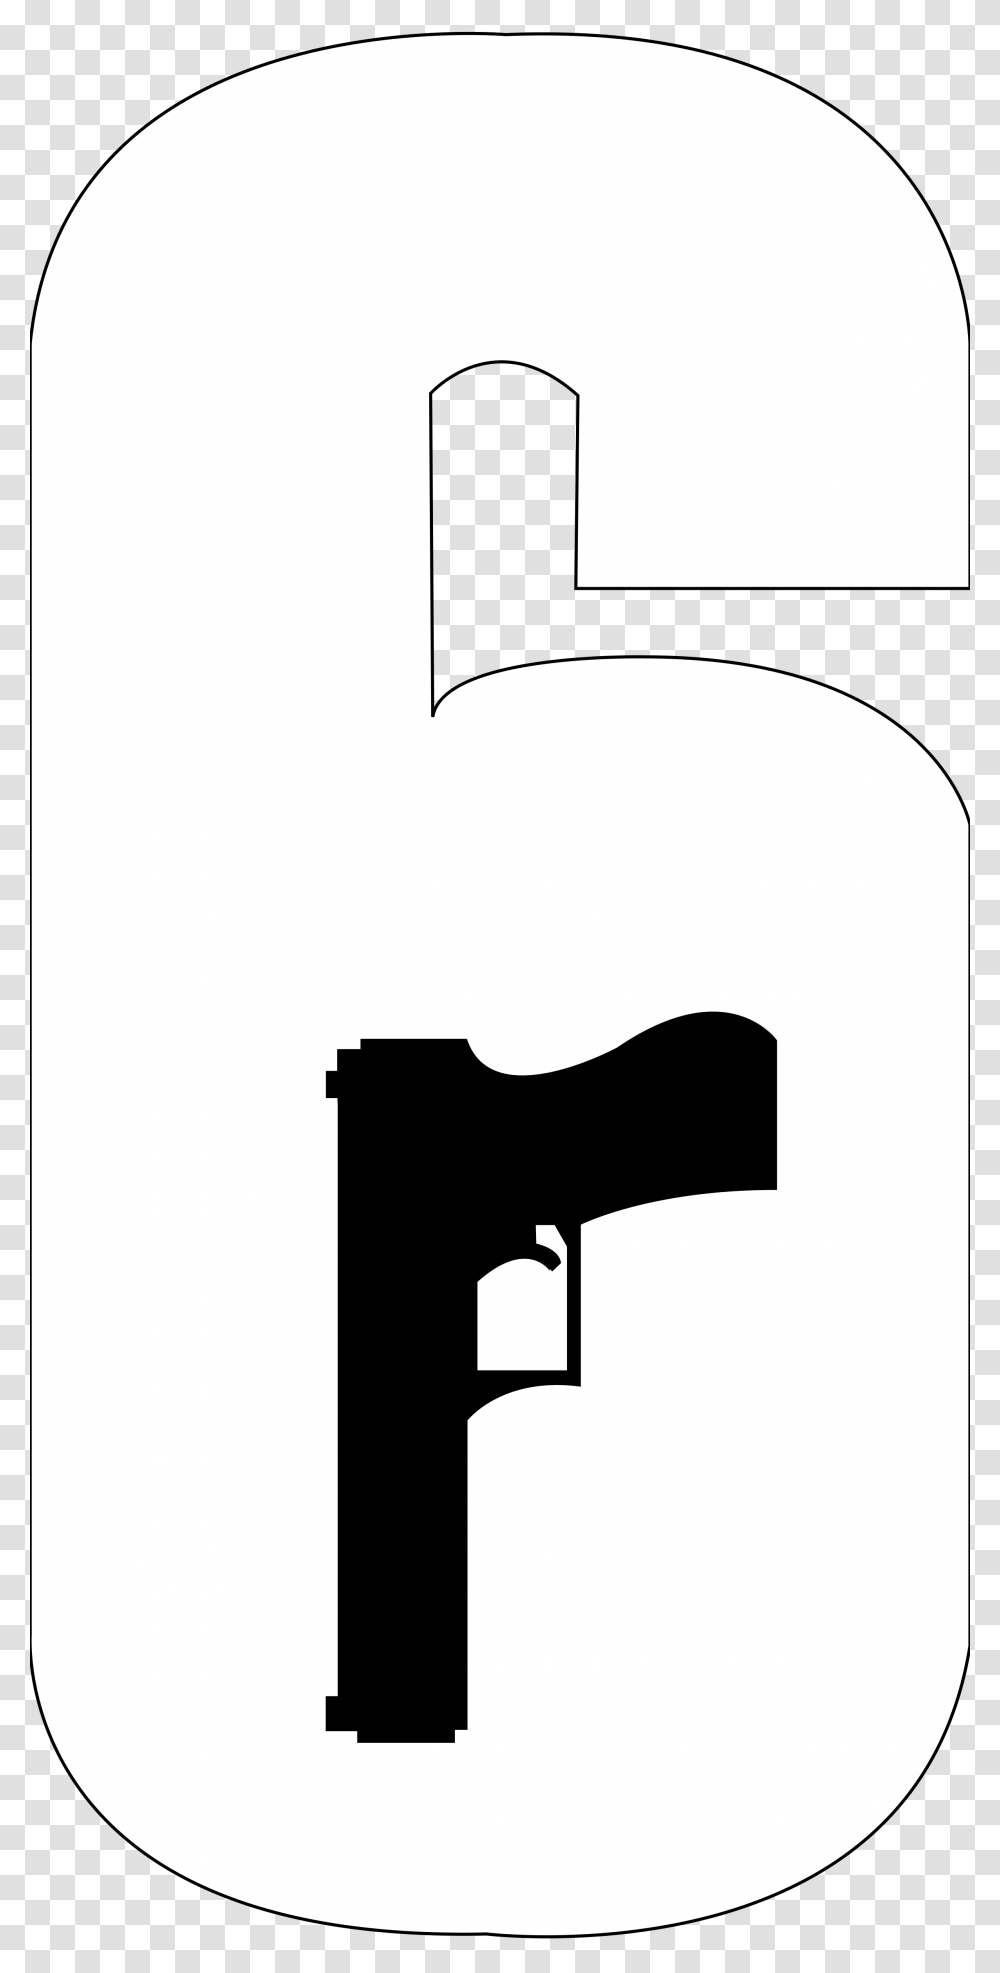 Rainbow Six Siege Logo Vector, Stencil, Weapon, Weaponry Transparent Png